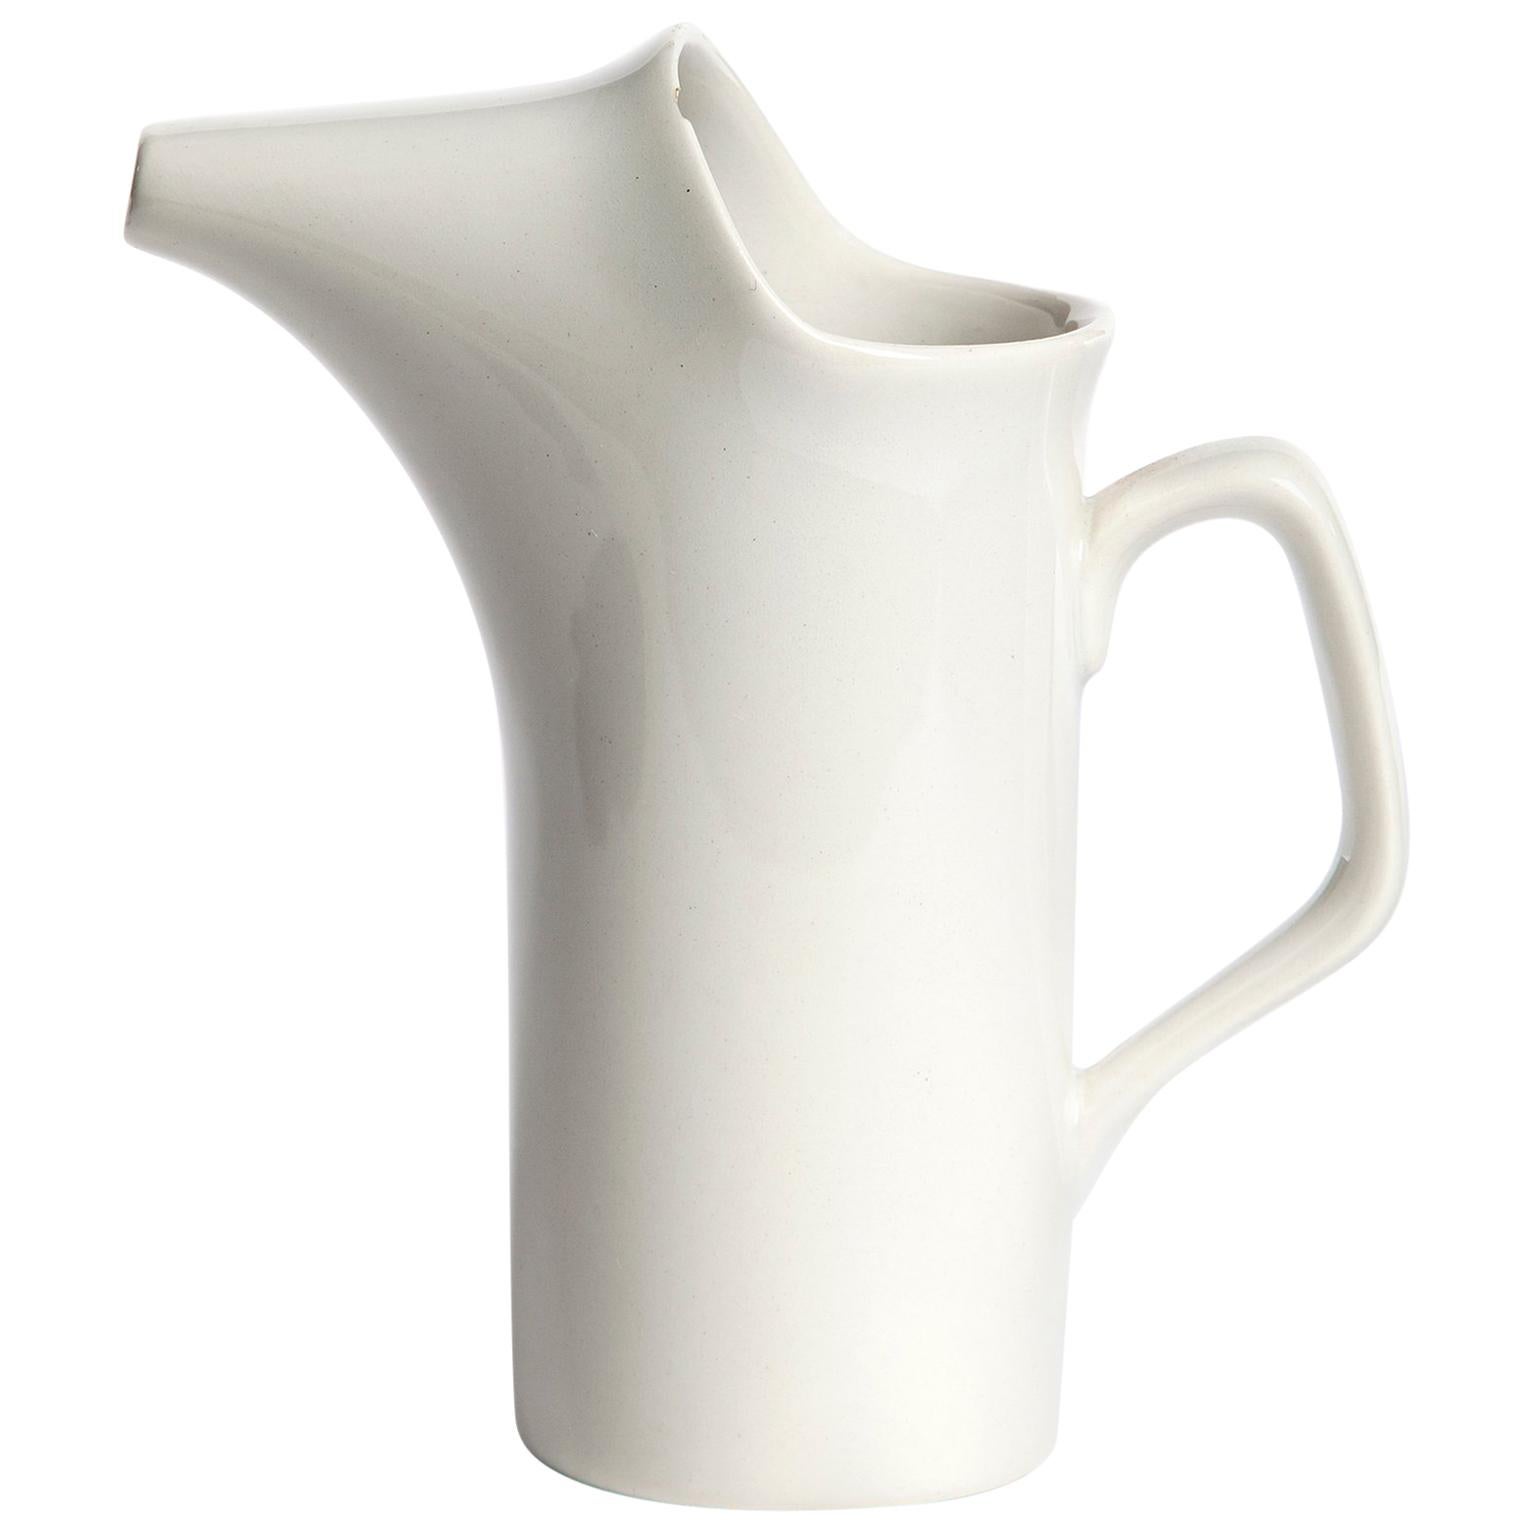 Small White Pitcher from the "Forma" Series